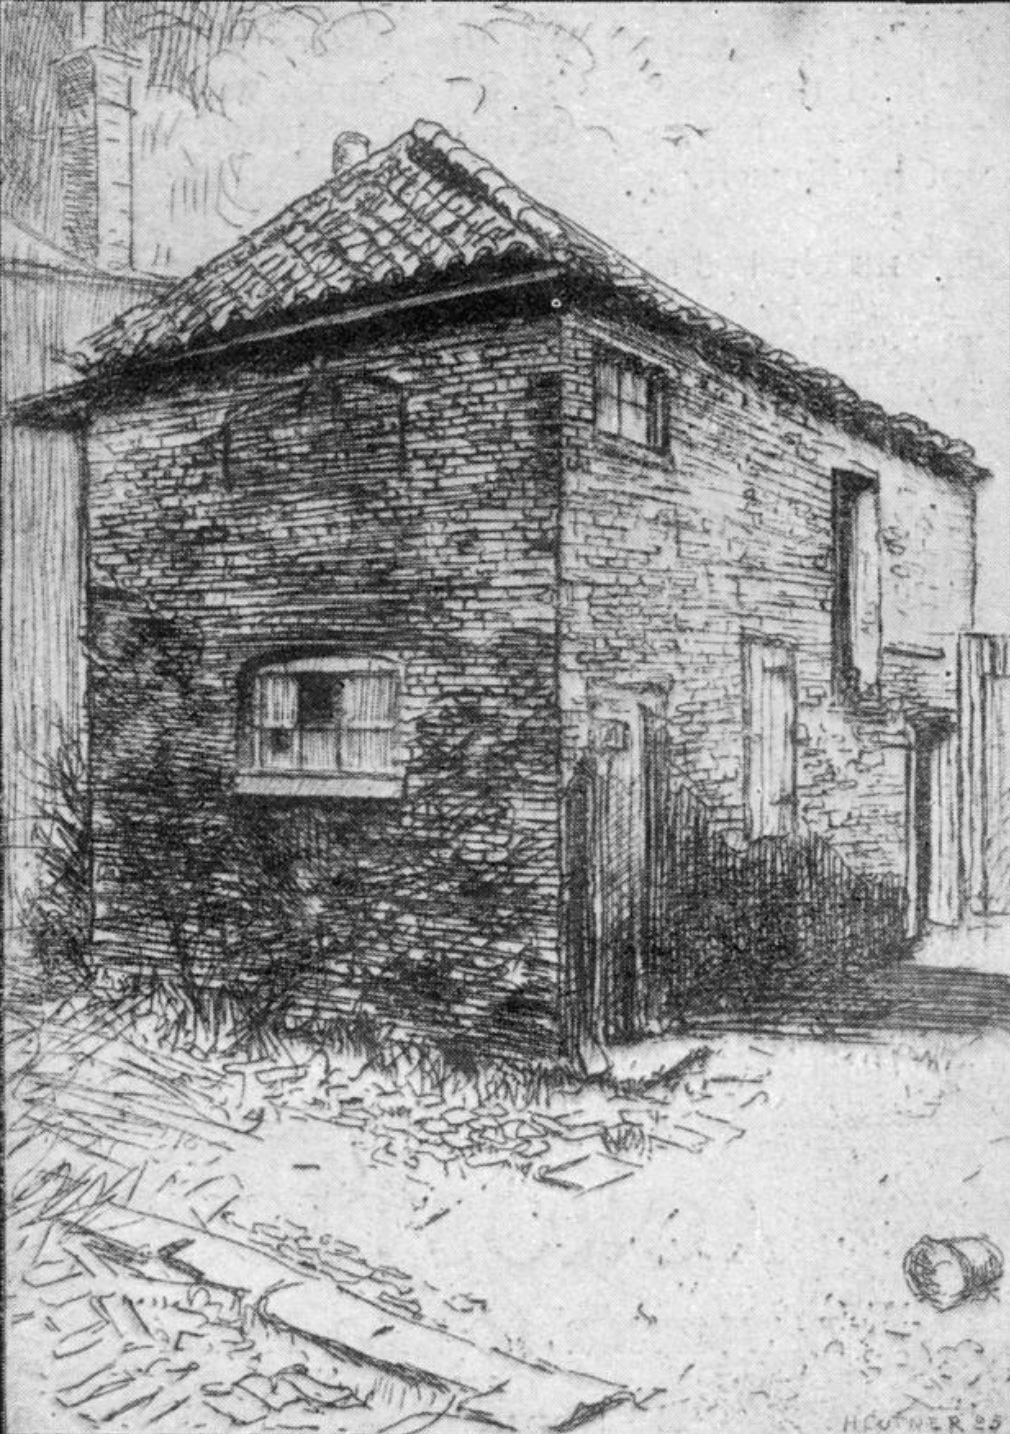 7 Church Street; drawing by H. Cutner, in The Graphic, 1926 (click to
        enlarge)